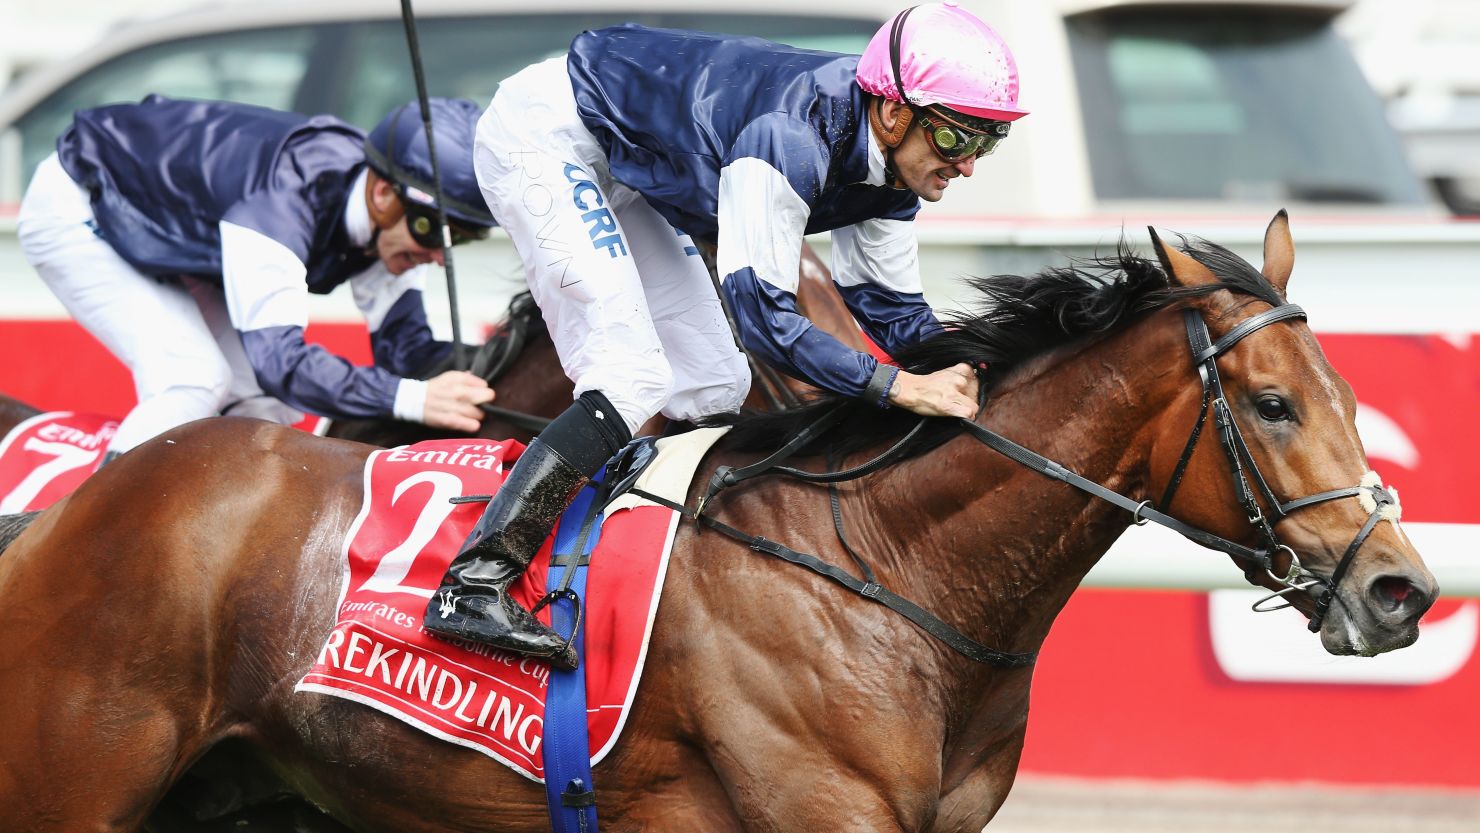 Corey Brown riding Rekindling wins the Melbourne Cup at Flemington Racecourse on November 7 in Melbourne.